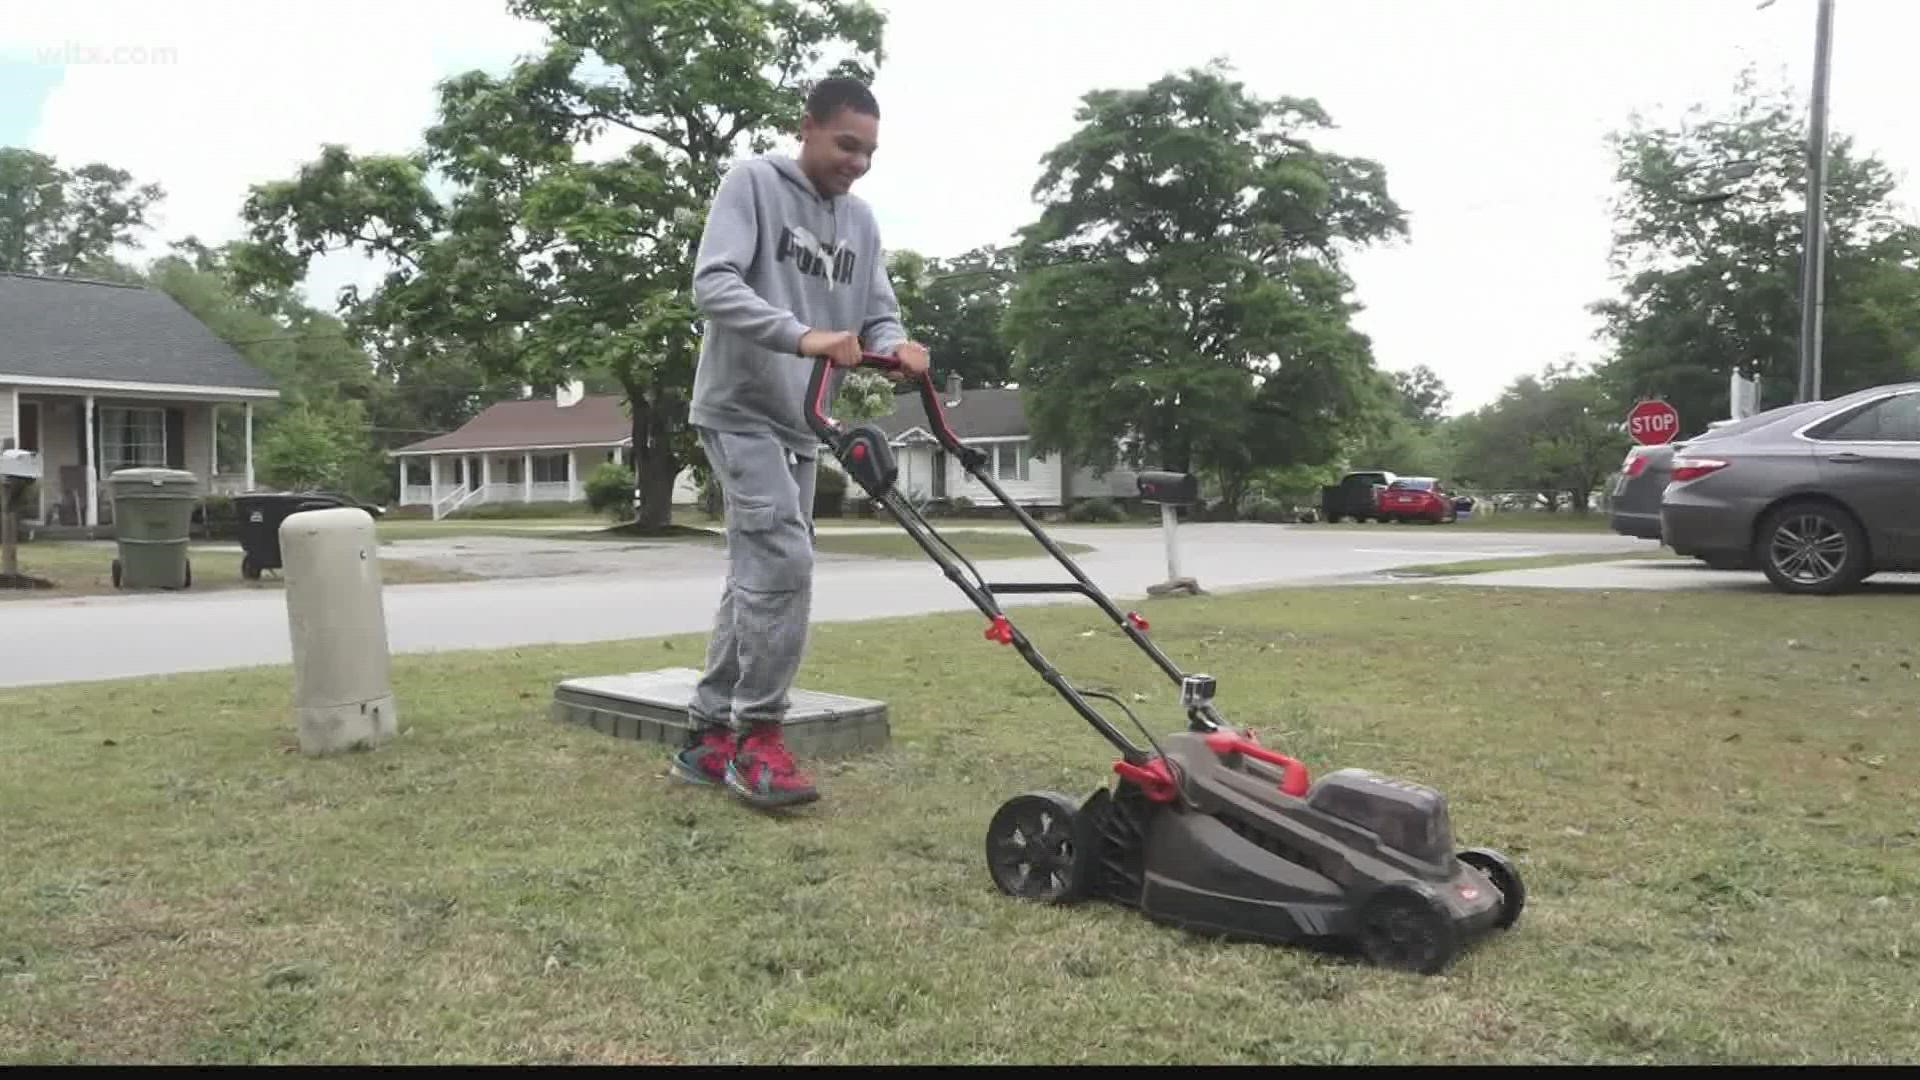 14-year-old Tyce Pender has started his own lawn service to help fund a very special project.